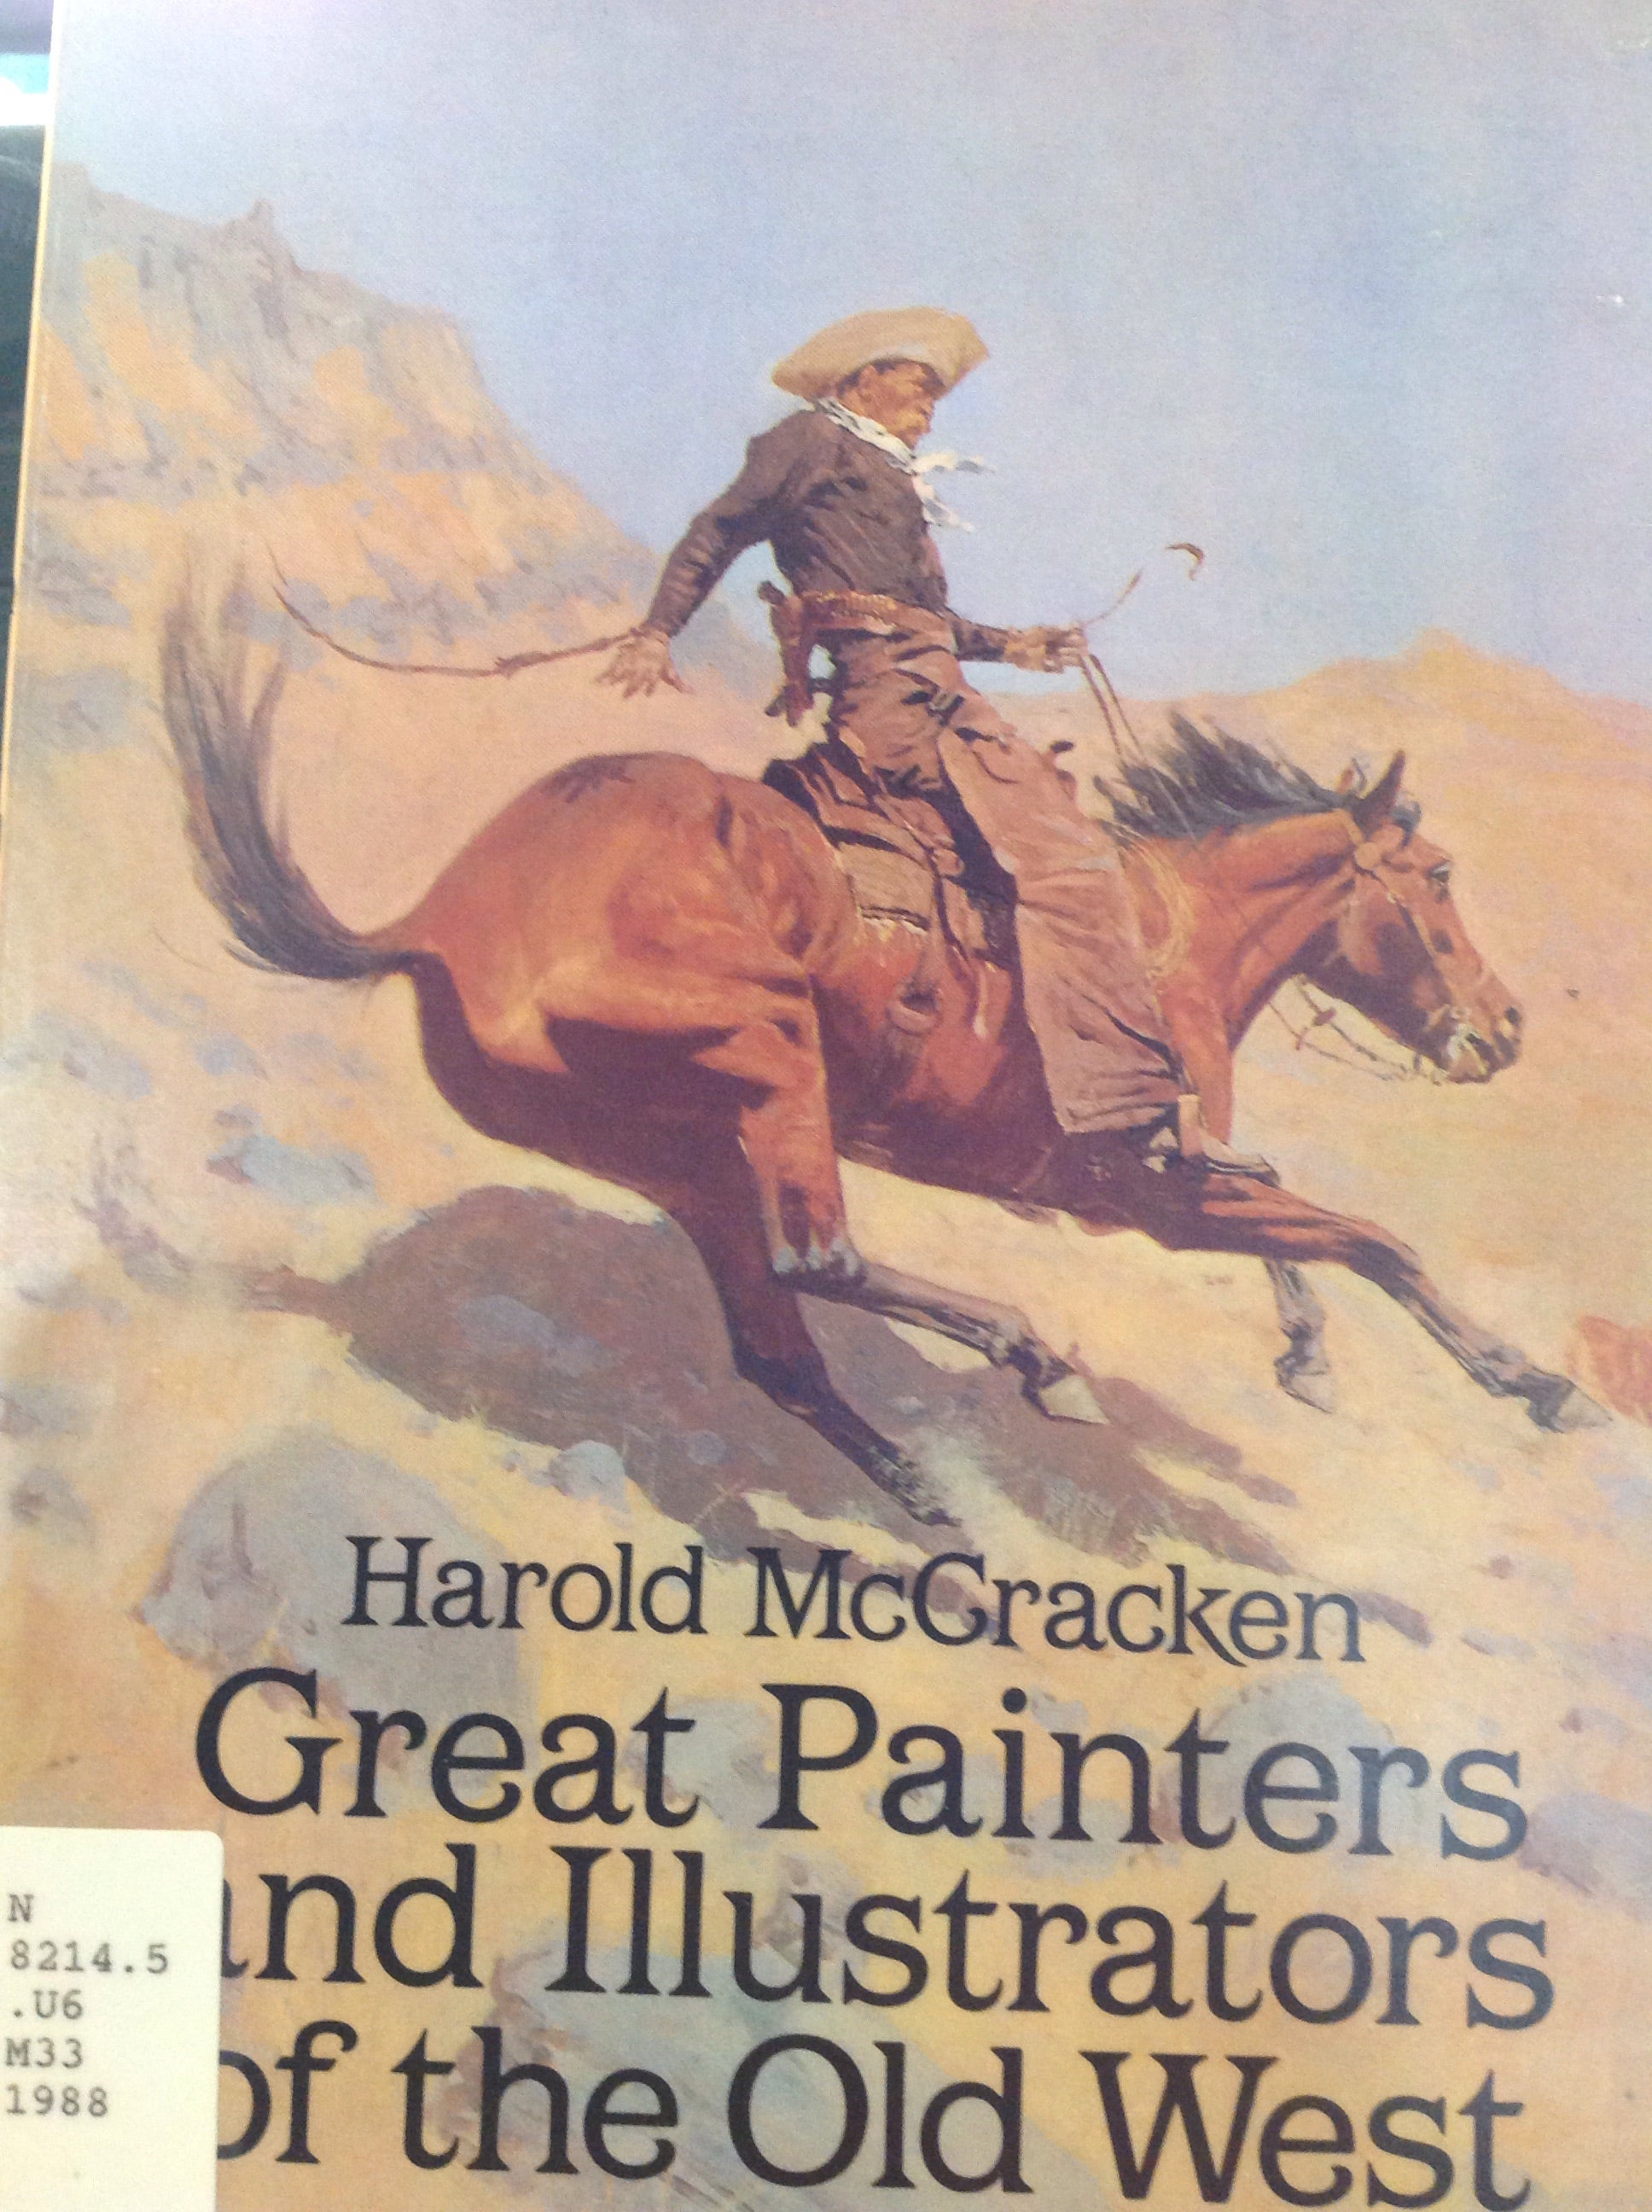 BOOKS - Harold McCracken Great Painters and Illustrations of the Old West